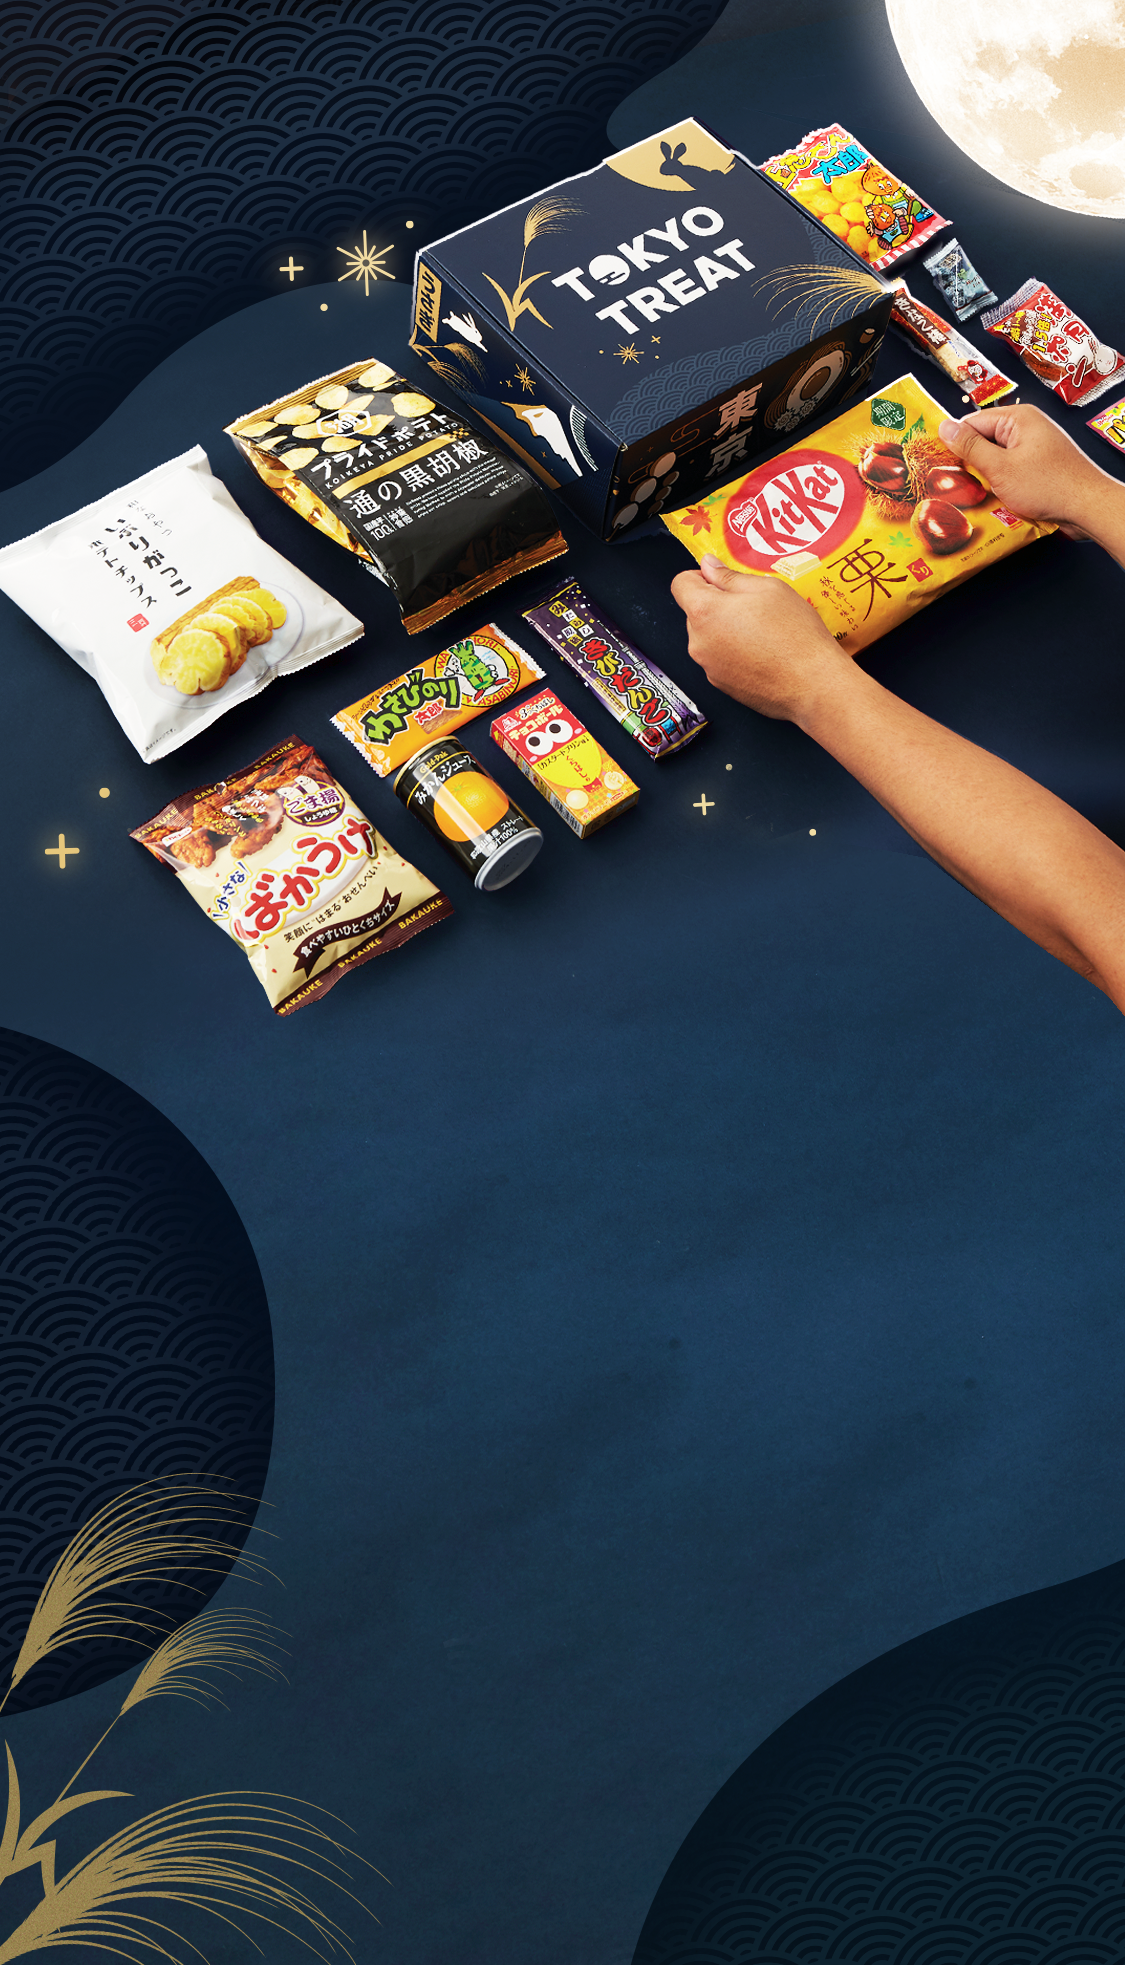 The TokyoTreat box sits against a dark navy backdrop surrounded by Tsukimi motifs.